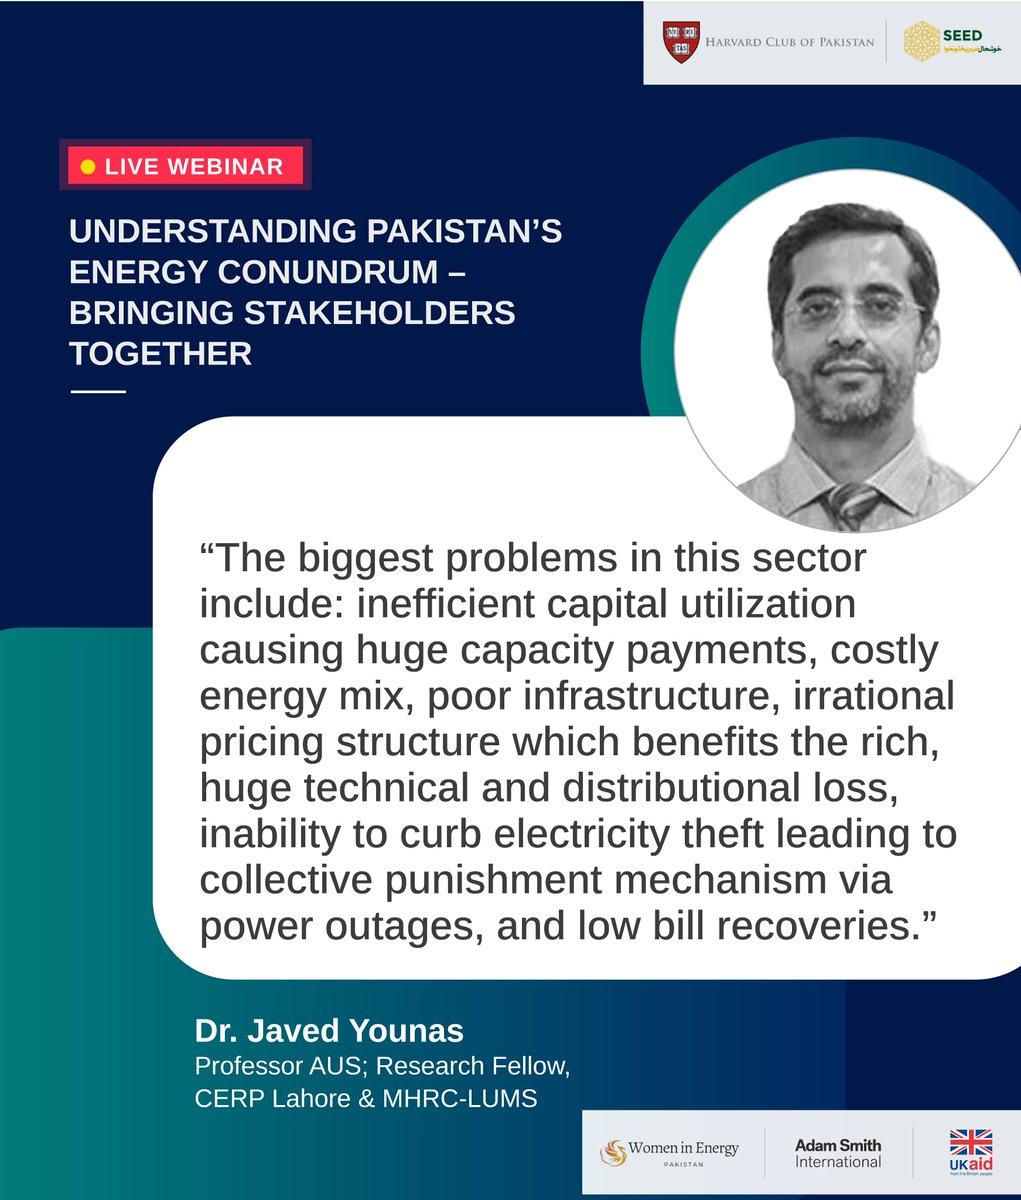 🔴LIVE: Dr. @javed_younas1, Professor AUS; Research Fellow, @CERPakistan  @MHRC-LUMS, enlists the major issues facing Pakistan’s energy sector.

Link to join:  zoom.us/j/96952139423

#EnergyChallenges #ExploreSolutions